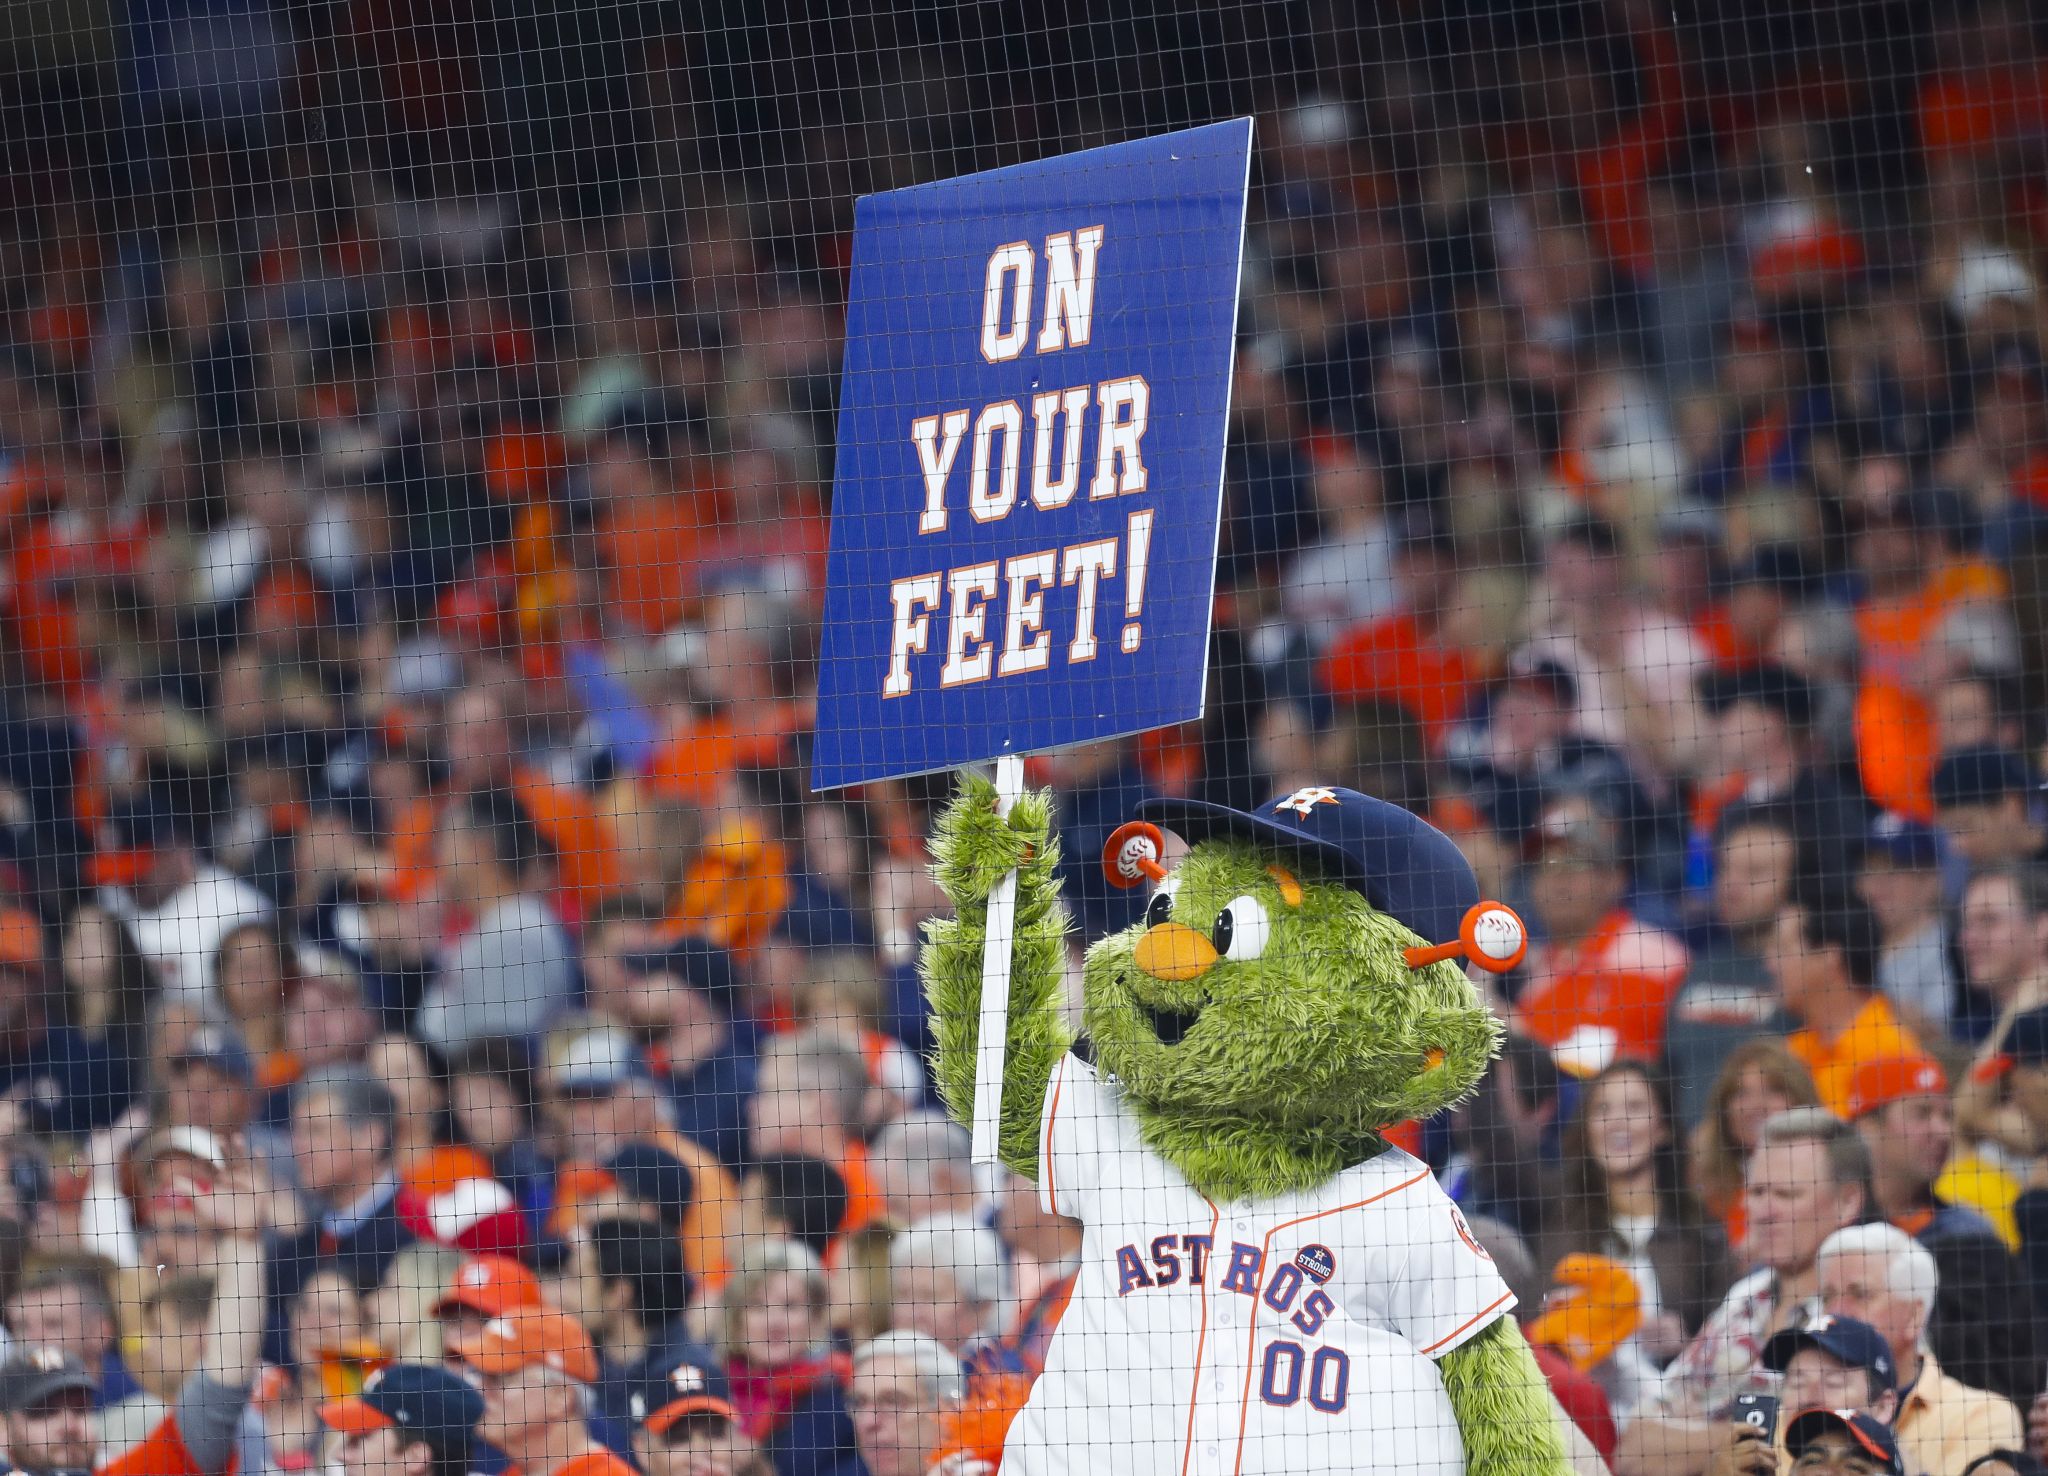 May 31, 2015: Houston Rockets mascot Clutch celebrates Houston Astros mascot  Orbit's 50th birthday during the MLB game between the Chicago White Sox and  the Houston Astros at Minute Maid Park in